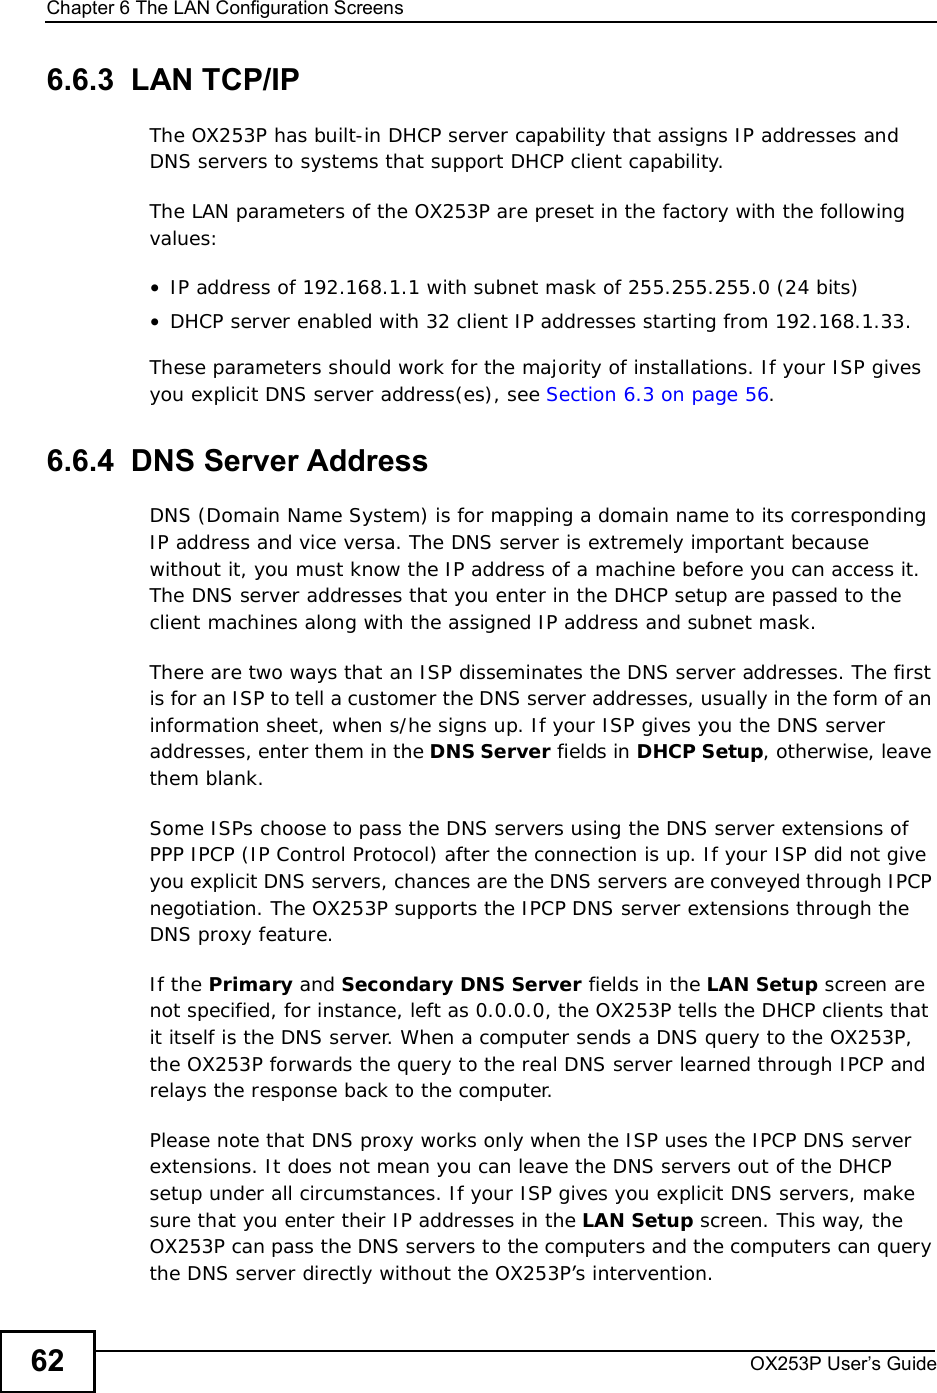 Chapter 6The LAN Configuration ScreensOX253P User’s Guide626.6.3  LAN TCP/IPThe OX253P has built-in DHCP server capability that assigns IP addresses and DNS servers to systems that support DHCP client capability.The LAN parameters of the OX253P are preset in the factory with the following values:•IP address of 192.168.1.1 with subnet mask of 255.255.255.0 (24 bits)•DHCP server enabled with 32 client IP addresses starting from 192.168.1.33. These parameters should work for the majority of installations. If your ISP gives you explicit DNS server address(es), see Section 6.3 on page 56.6.6.4  DNS Server AddressDNS (Domain Name System) is for mapping a domain name to its corresponding IP address and vice versa. The DNS server is extremely important because without it, you must know the IP address of a machine before you can access it. The DNS server addresses that you enter in the DHCP setup are passed to the client machines along with the assigned IP address and subnet mask.There are two ways that an ISP disseminates the DNS server addresses. The first is for an ISP to tell a customer the DNS server addresses, usually in the form of an information sheet, when s/he signs up. If your ISP gives you the DNS server addresses, enter them in the DNS Server fields in DHCP Setup, otherwise, leave them blank.Some ISPs choose to pass the DNS servers using the DNS server extensions of PPP IPCP (IP Control Protocol) after the connection is up. If your ISP did not give you explicit DNS servers, chances are the DNS servers are conveyed through IPCP negotiation. The OX253P supports the IPCP DNS server extensions through the DNS proxy feature.If the Primary and Secondary DNS Server fields in the LAN Setup screen are notspecified, for instance, left as 0.0.0.0, the OX253P tells the DHCP clients that it itself is the DNS server. When a computer sends a DNS query to the OX253P, the OX253P forwards the query to the real DNS server learned through IPCP and relays the response back to the computer.Please note that DNS proxy works only when the ISP uses the IPCP DNS server extensions. It does not mean you can leave the DNS servers out of the DHCP setup under all circumstances. If your ISP gives you explicit DNS servers, make sure that you enter their IP addresses in the LAN Setup screen. This way, the OX253P can pass the DNS servers to the computers and the computers can query the DNS server directly without the OX253P’s intervention.